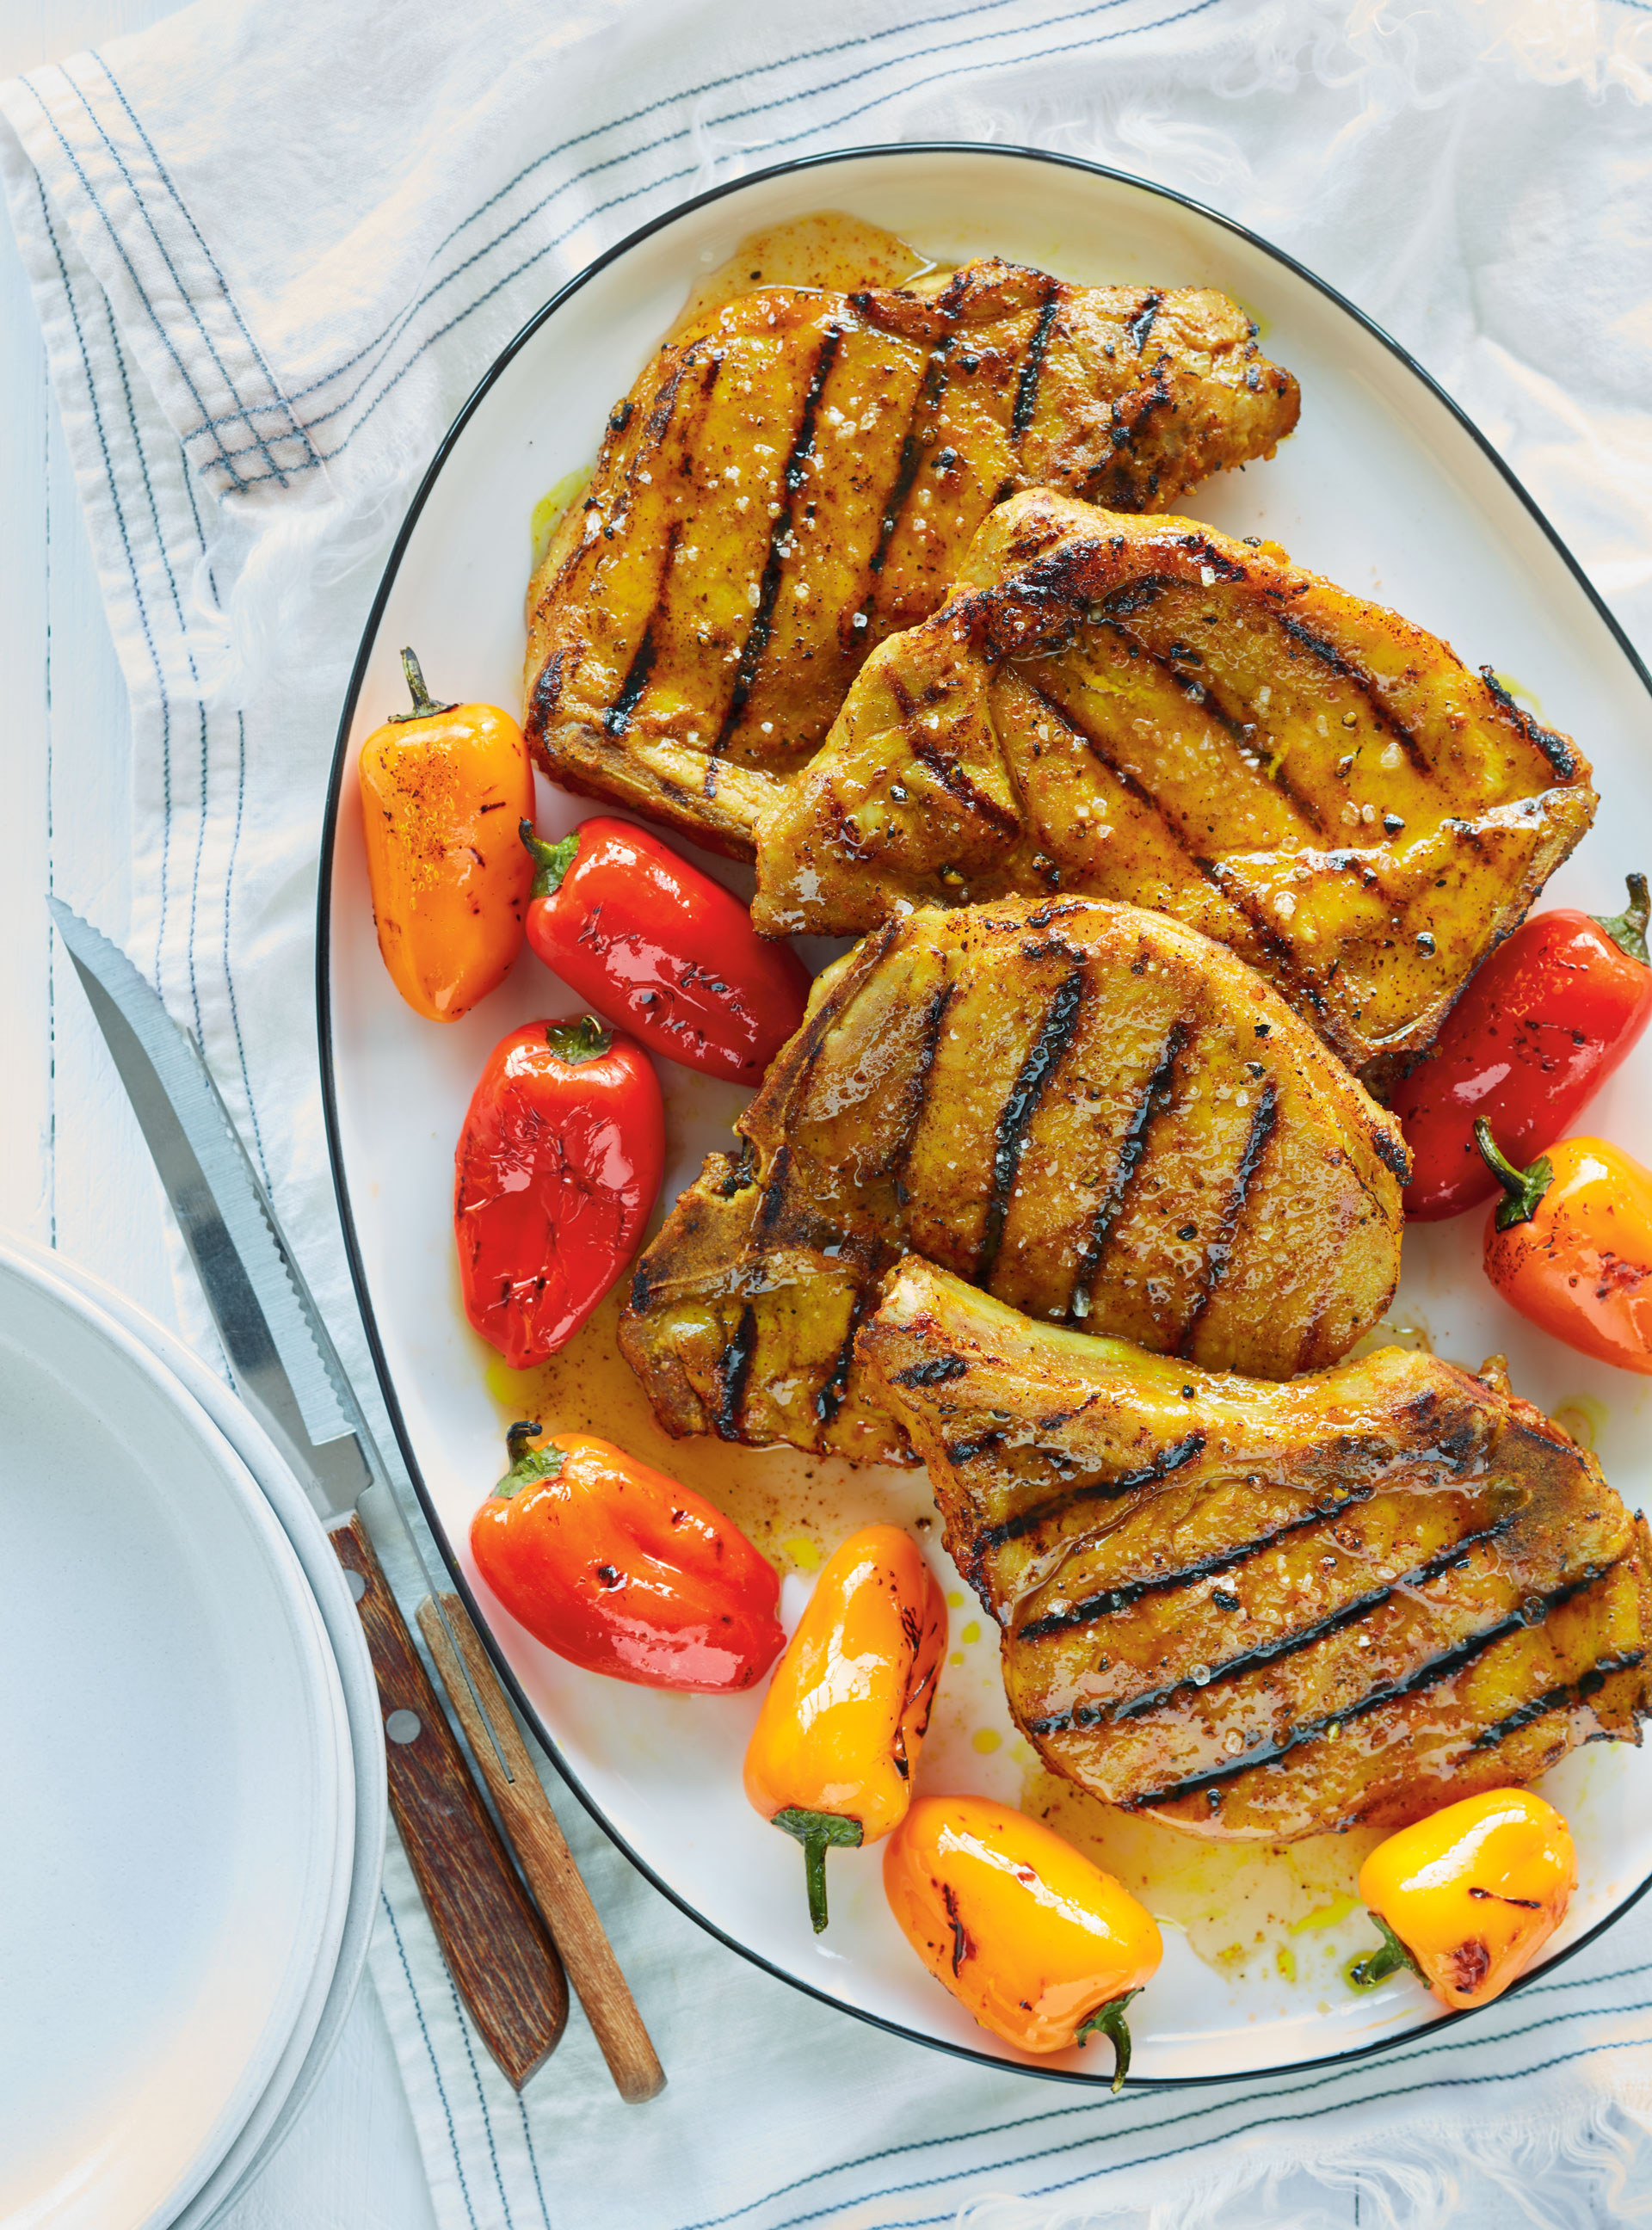 Grilled Pork Chops with Turmeric and Honey